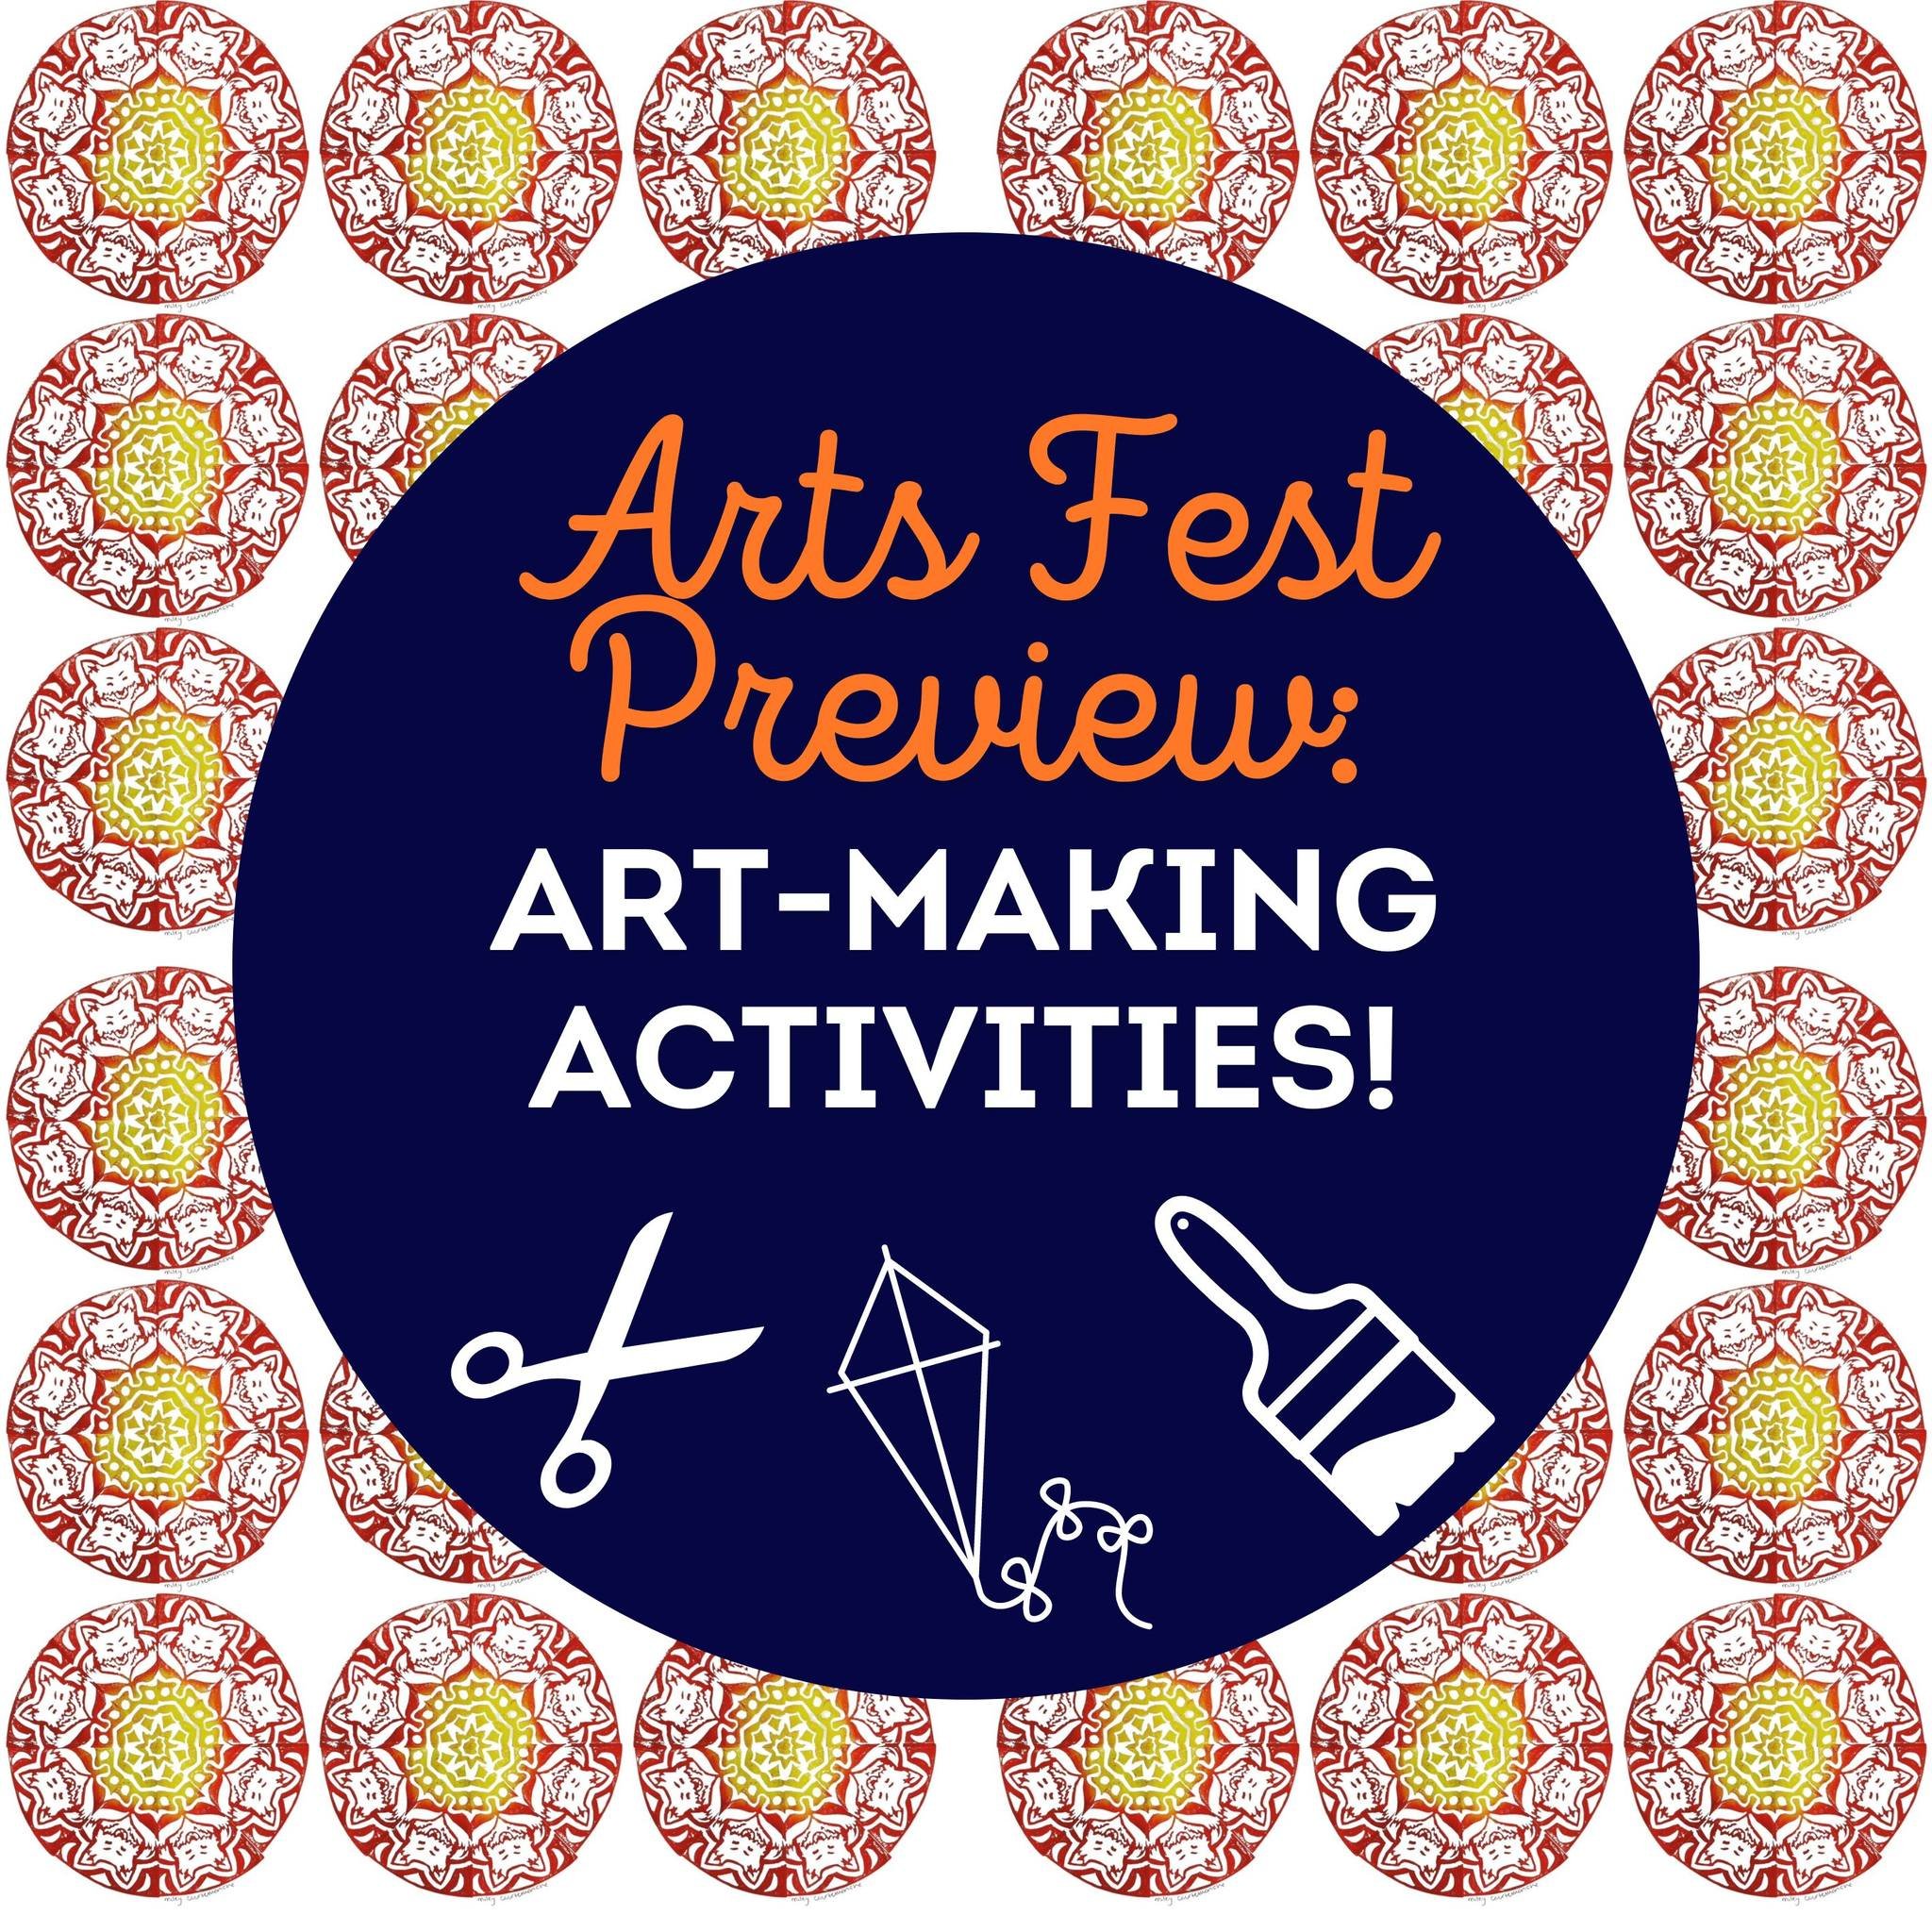 The Arts Festival isn't just about seeing art; it's about MAKING art! 

We'll have a dozen art-making activities for all ages this weekend, led by local artists and arts organizations. Faves from last year will be back, and we have great new ones lik